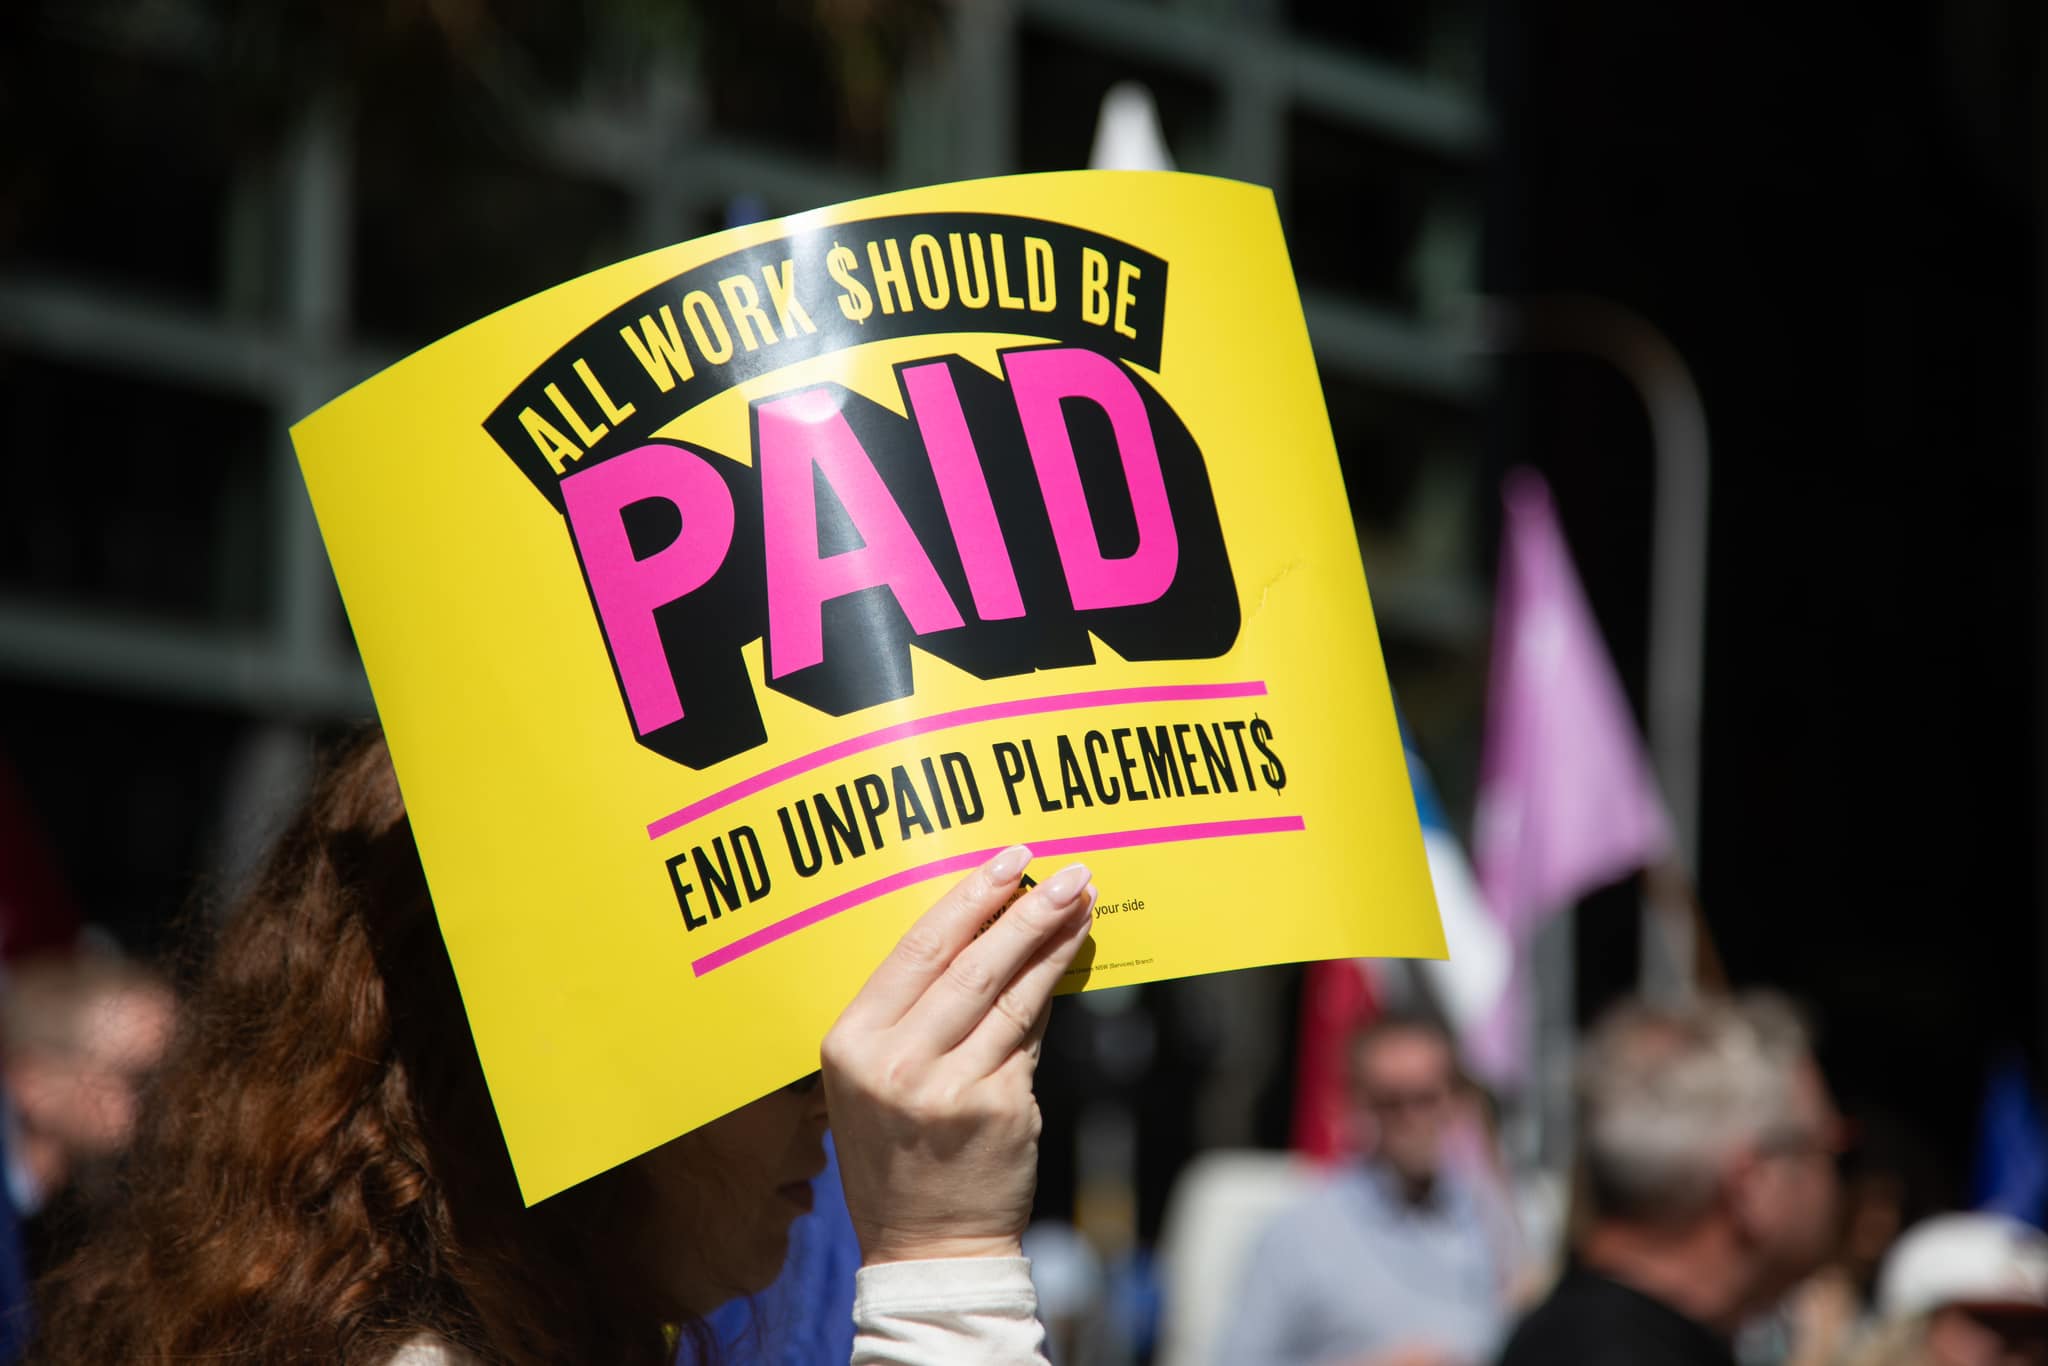 “A slap in the face”: Placement poverty payment doesn’t go far enough, unions say